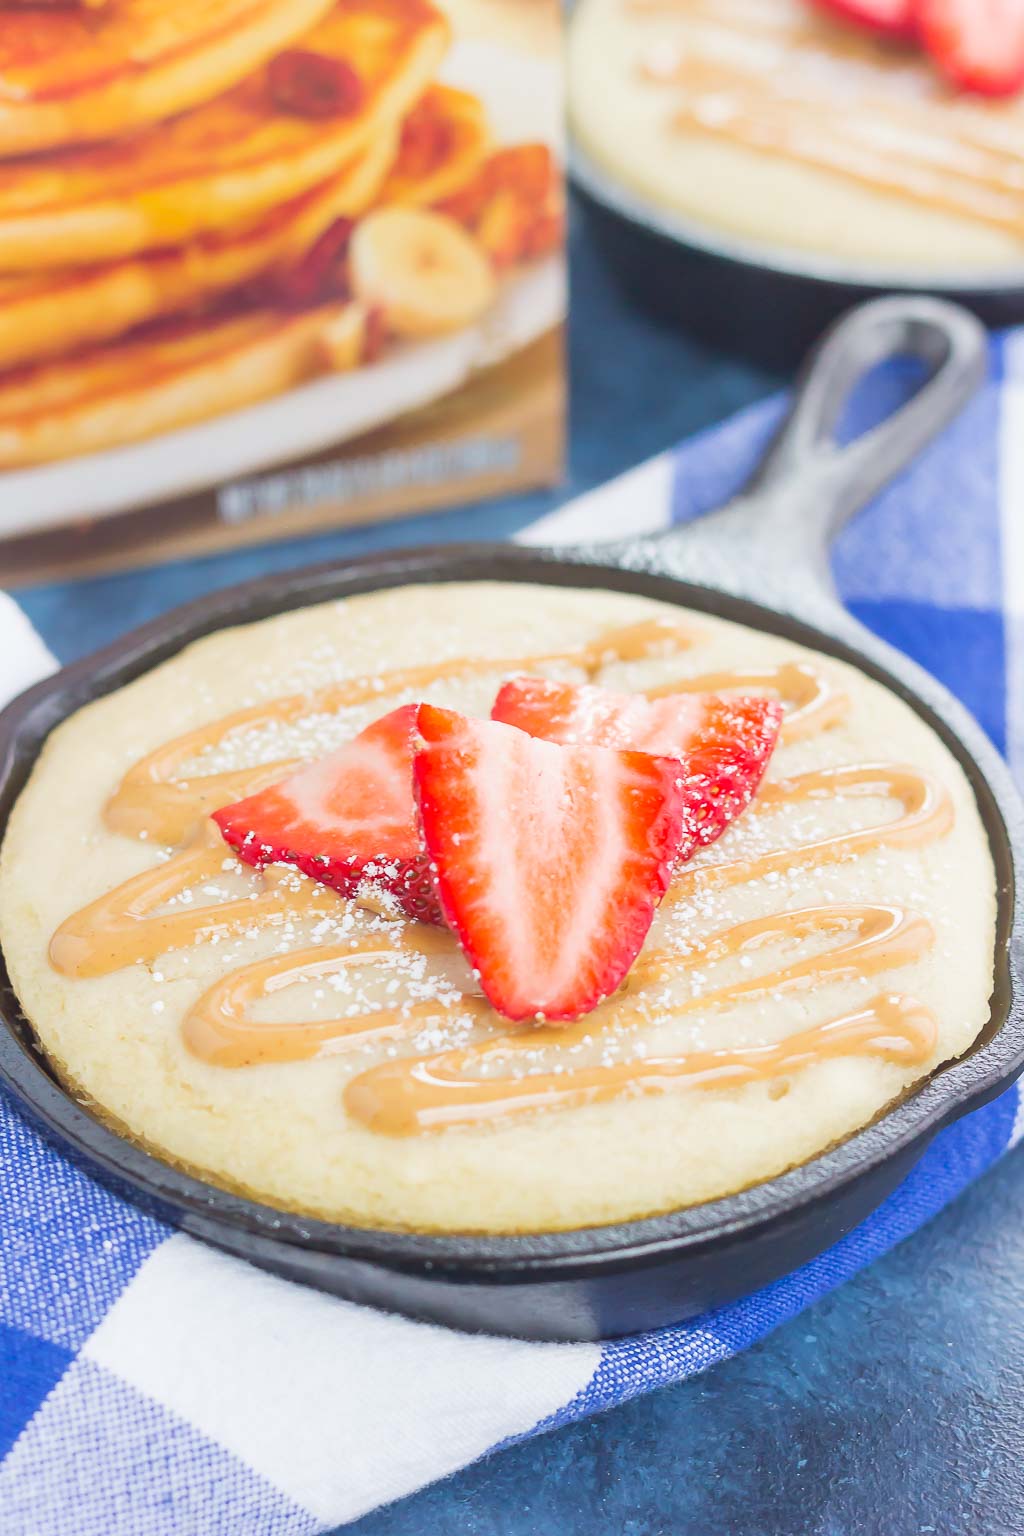 Peanut Butter and Jelly Baked Pancakes are a warm and cozy breakfast to get you going in the mornings. Fluffy, buttermilk pancake batter is swirled with sweet strawberry jelly and then baked in mini cast iron skillets. Drizzled with a sweet peanut butter syrup and topped with fresh strawberries, this easy breakfast is ready in less than 30 minutes and perfect for the whole family!